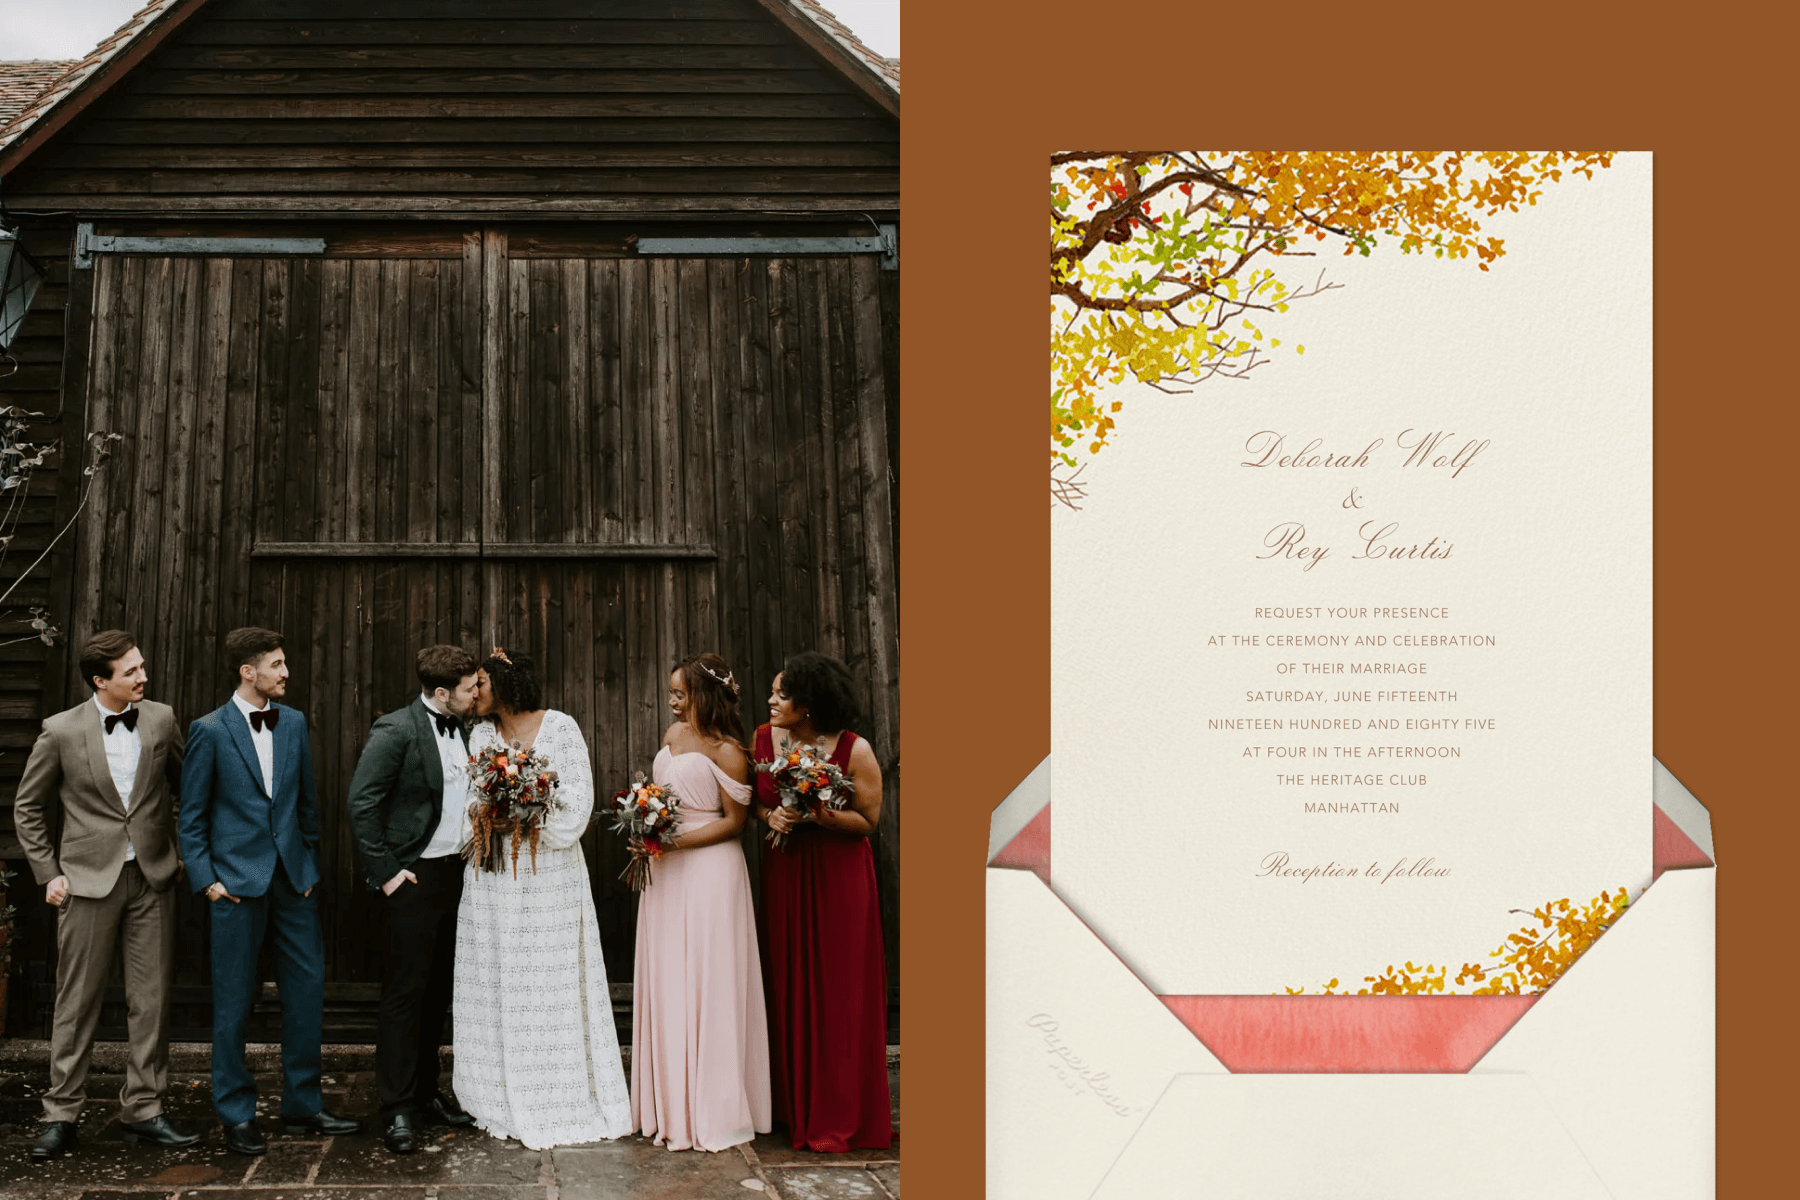 Left: A man and woman kiss in front of a barn while their wedding party members look on. Right: A wedding invitation with autumnal leaves on a tree branch in the upper left corner